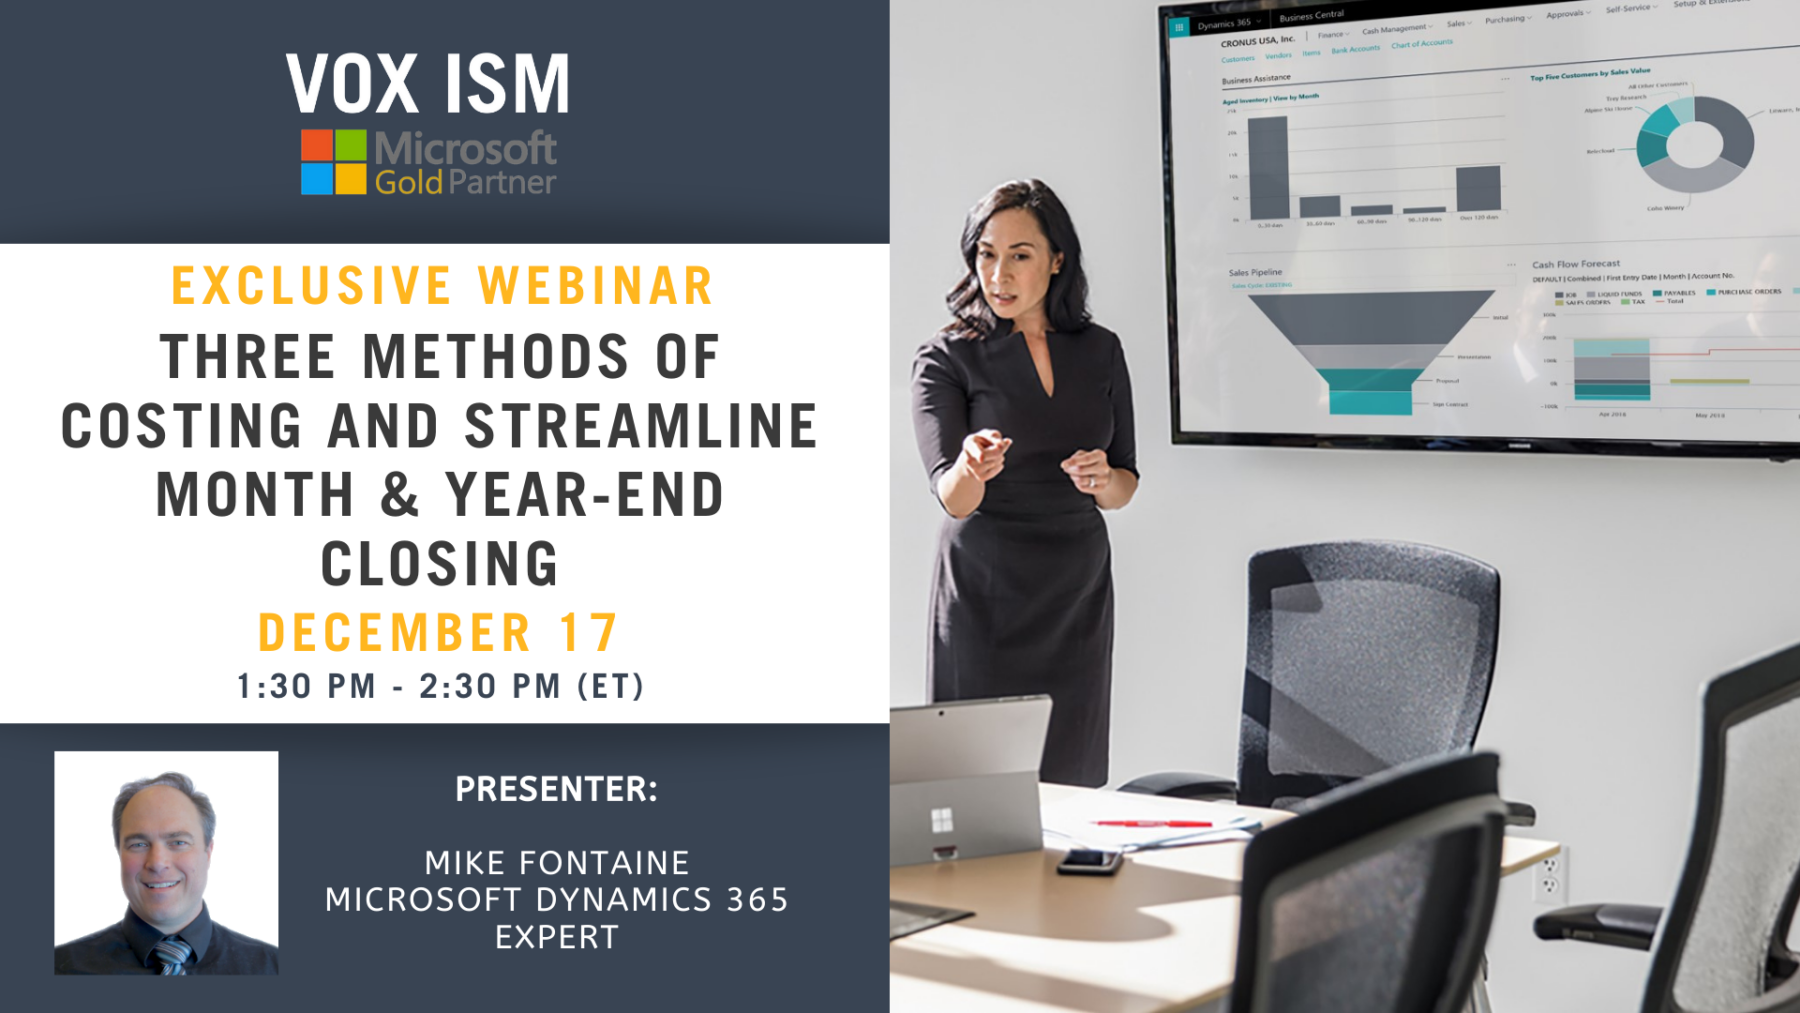 Three methods of costing and streamline month & year-end closing - December 17 - Webinar